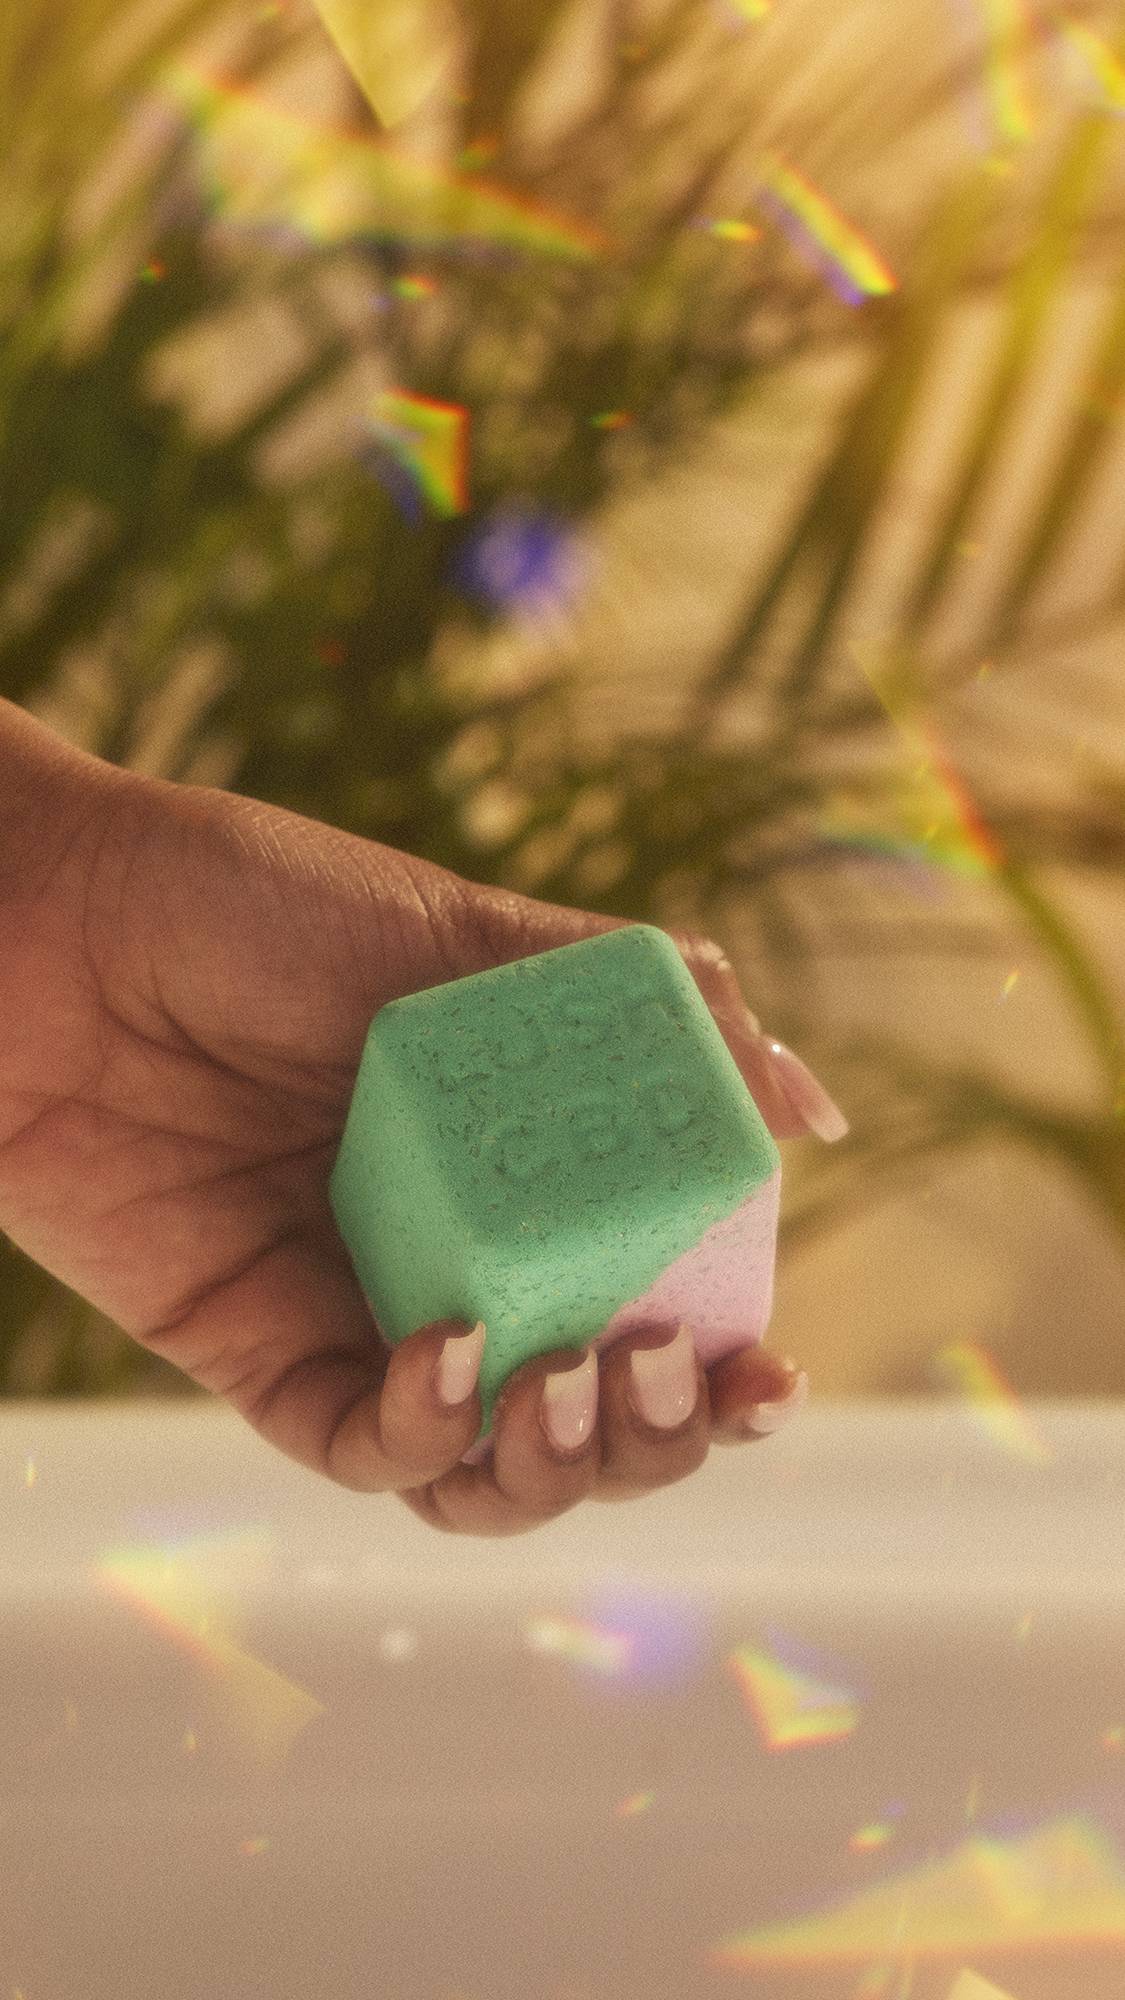 A close-up of the model's hand holding the Magik CBD Epson Salt bath bomb focusing on the vibrant pink and green. The image has flecks of rainbow reflections on a warm, sepia tone.